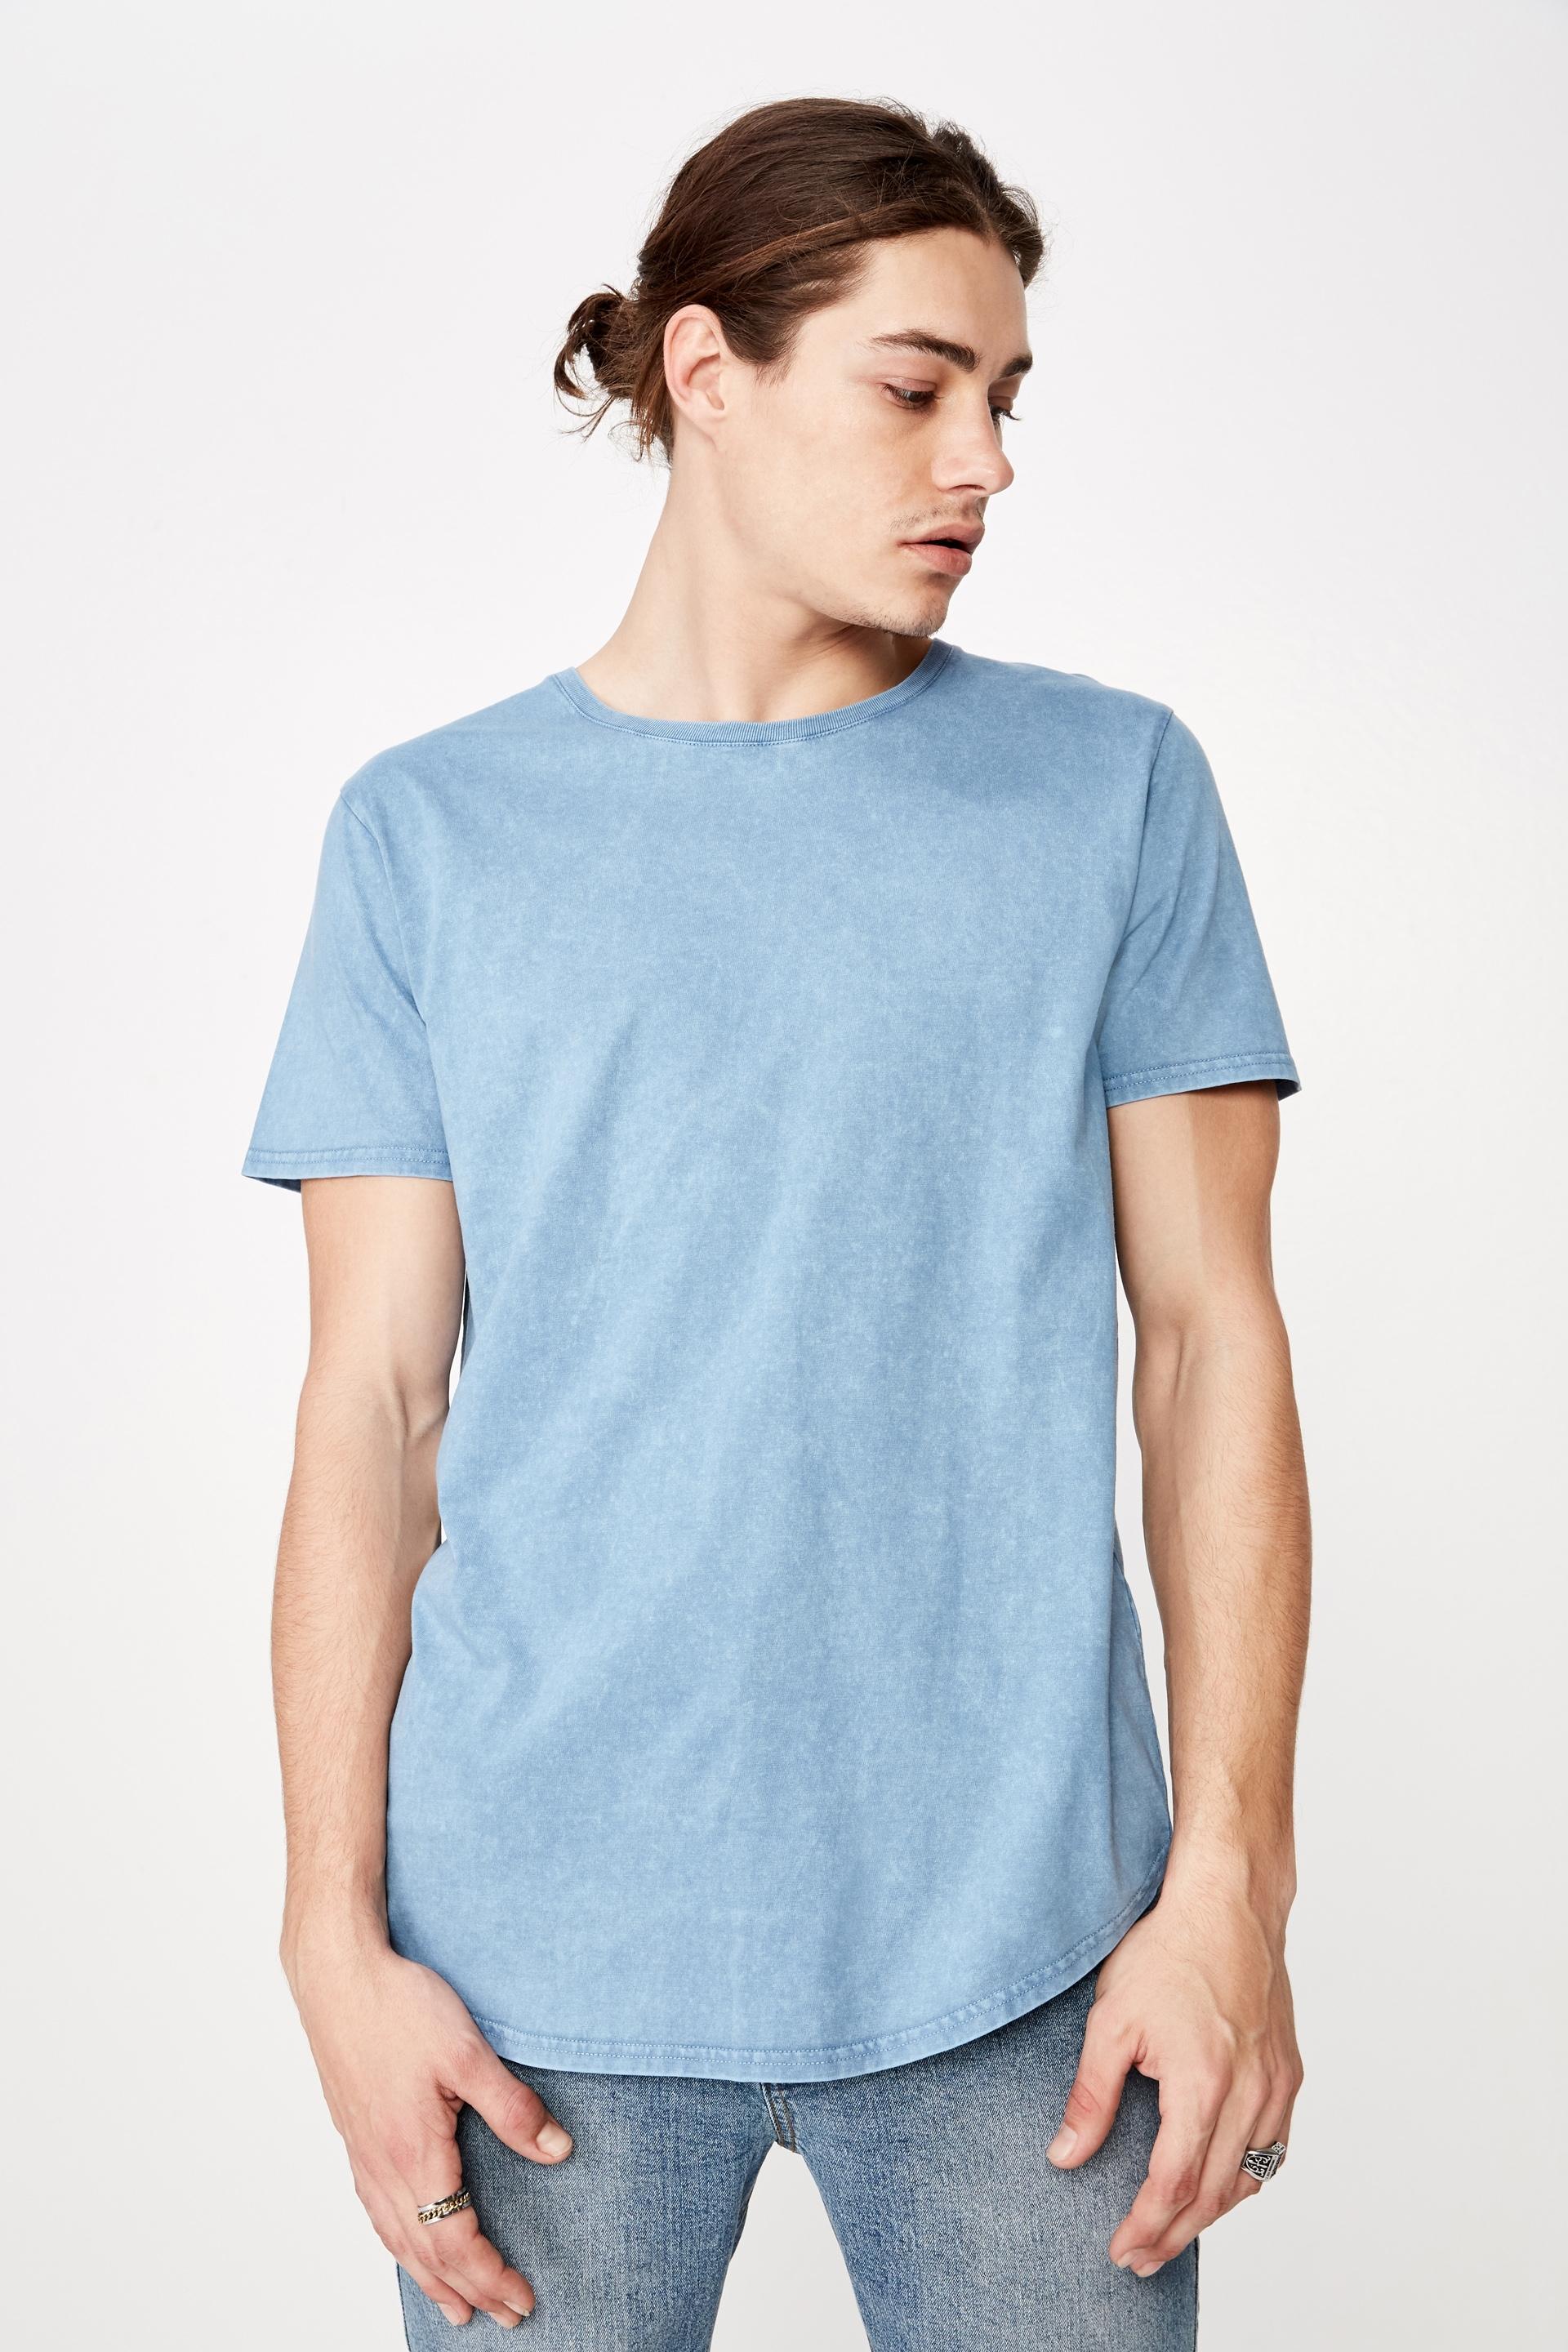 Washed curved t shirt - washed sea blue Factorie T-Shirts & Vests ...